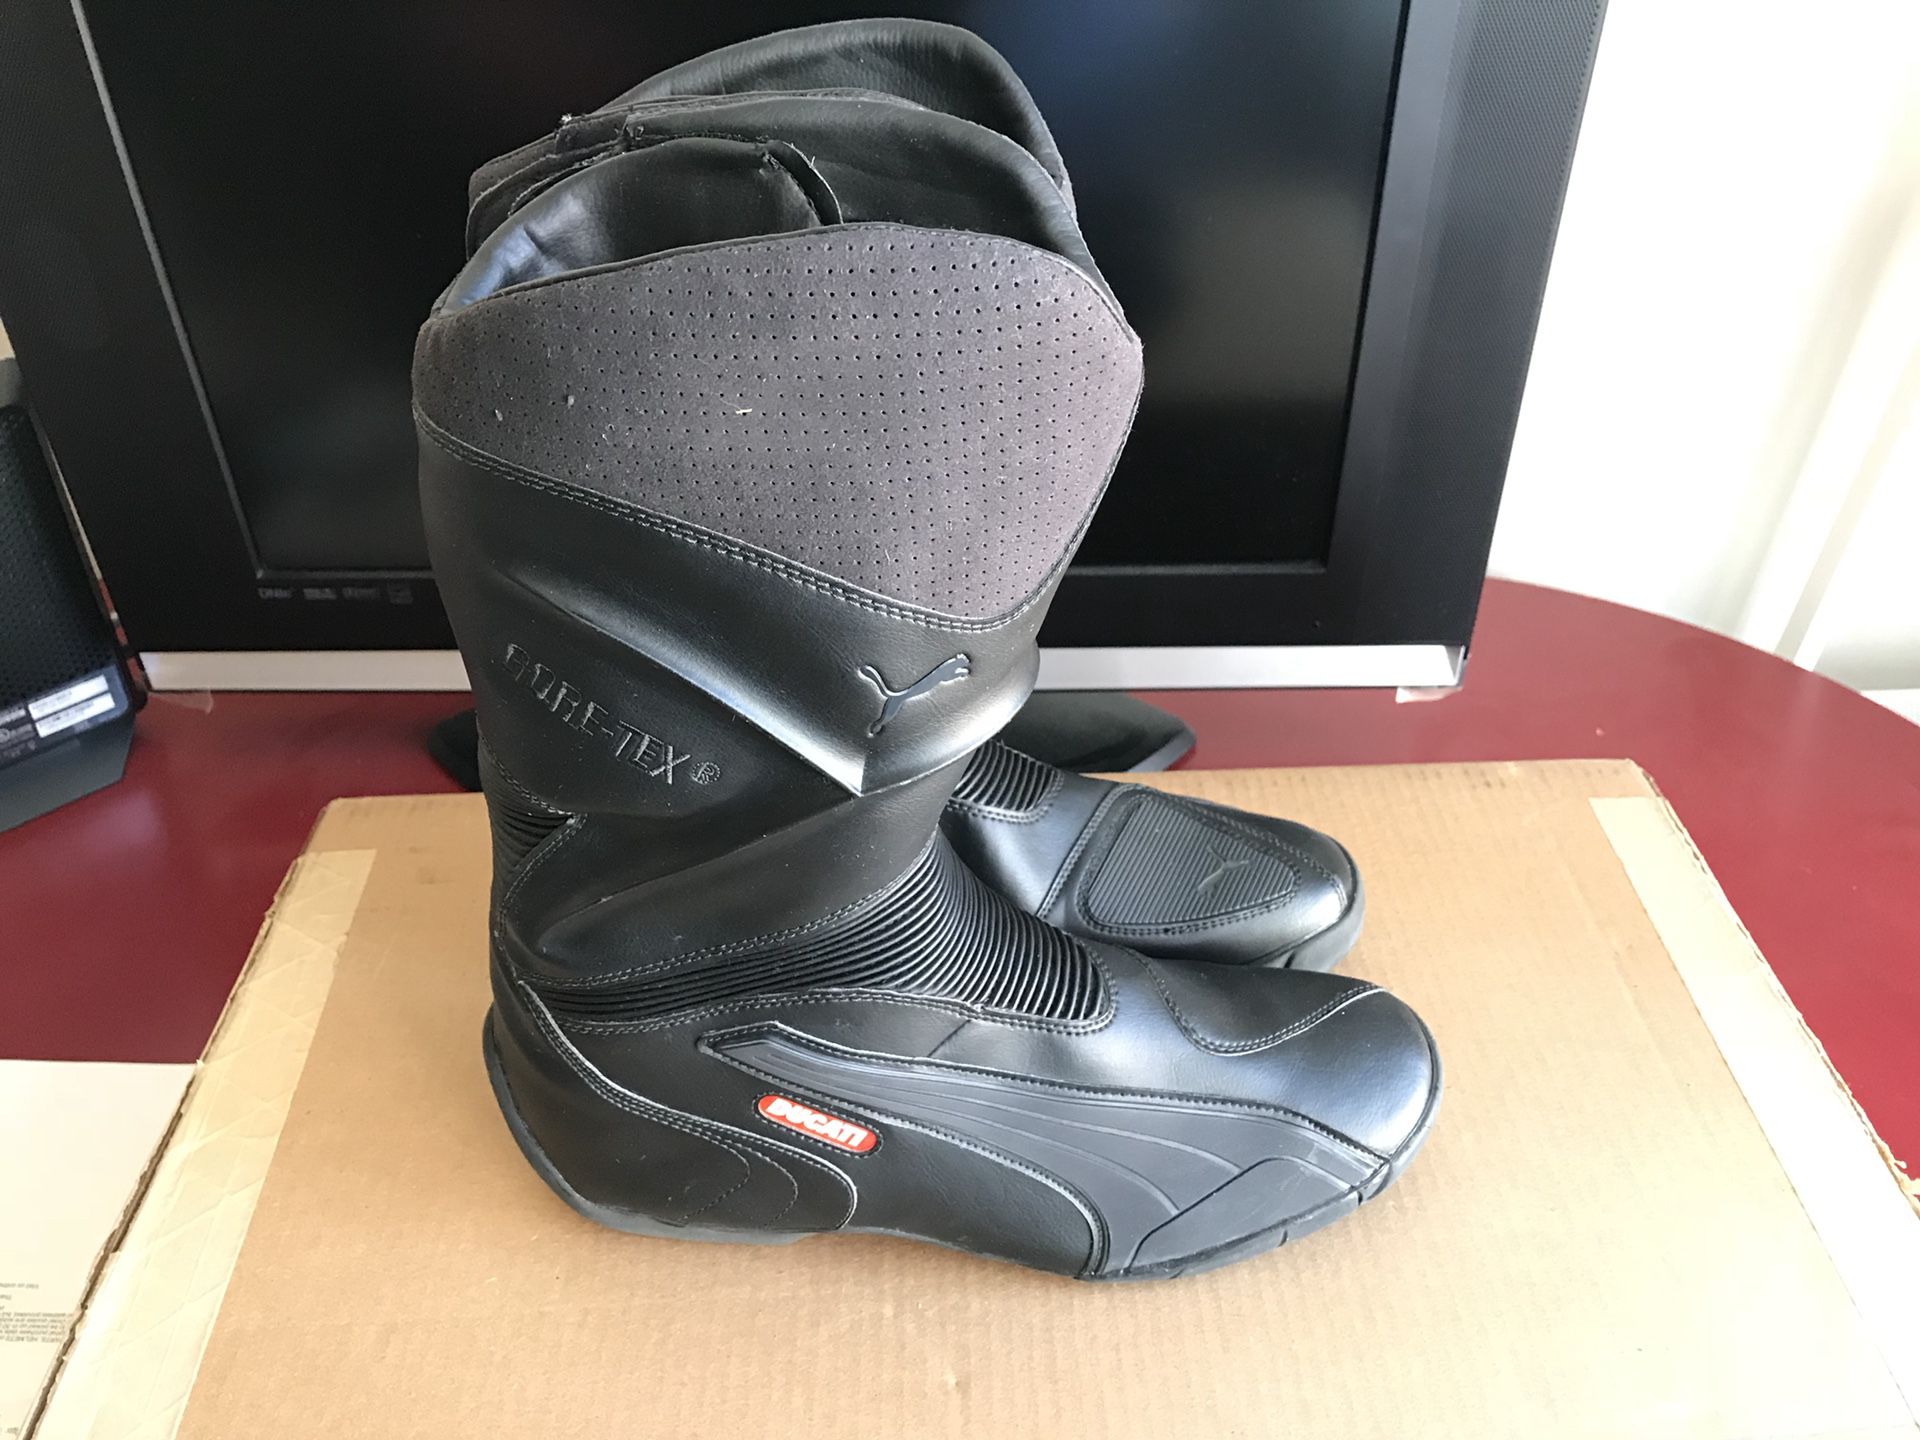 Puma Ducati Motorcycle Boots US Size 10 for $85 or Best Offer